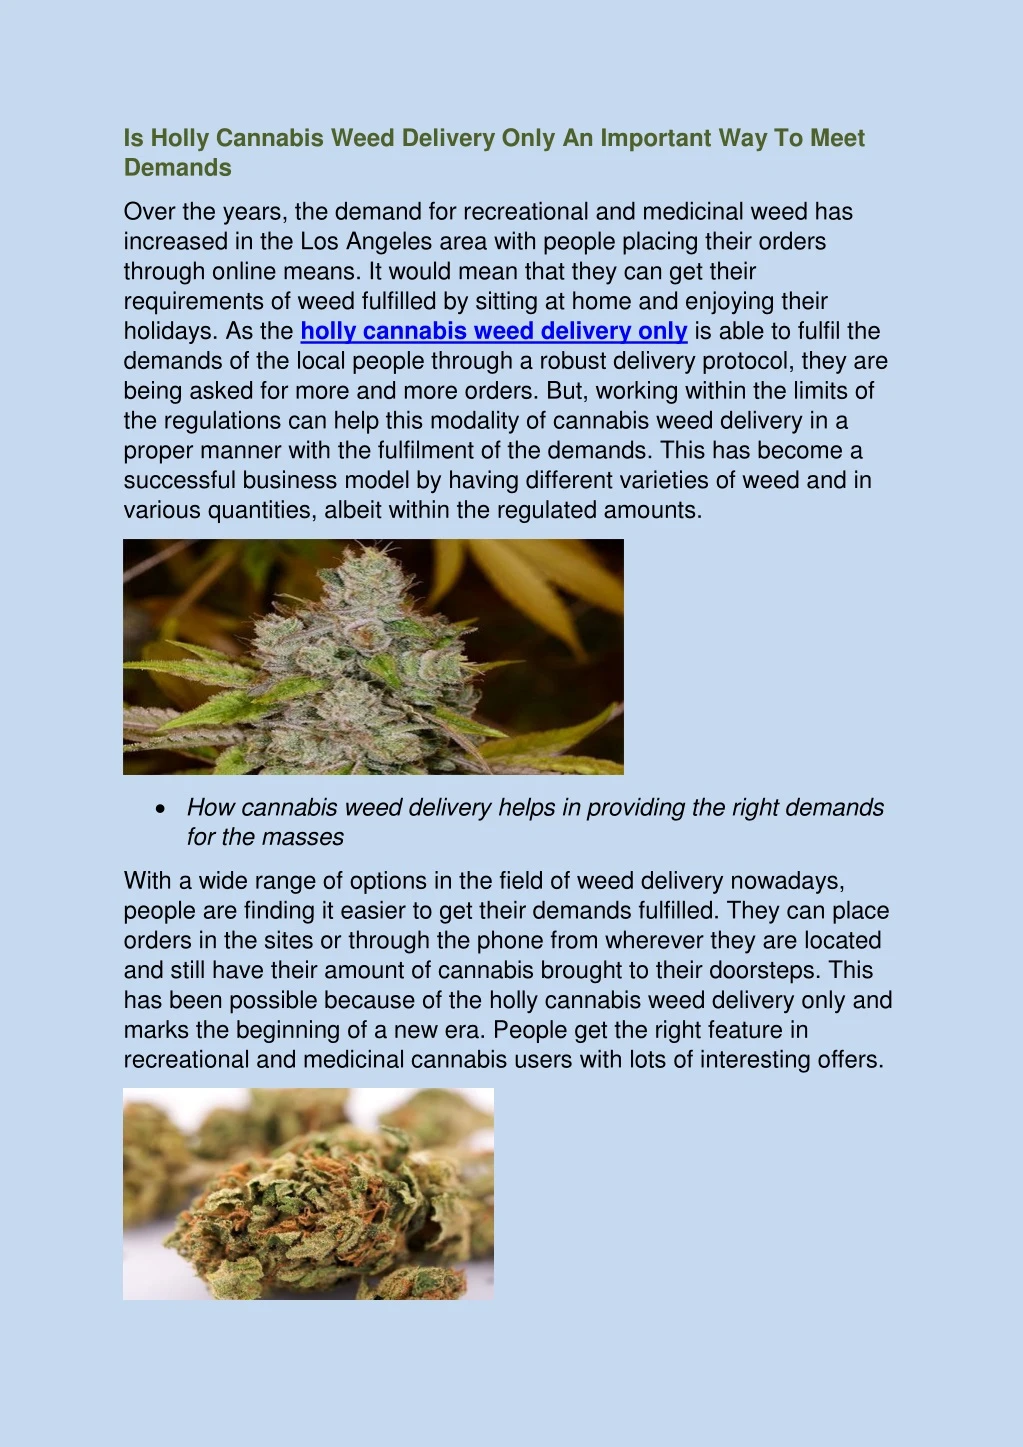 is holly cannabis weed delivery only an important